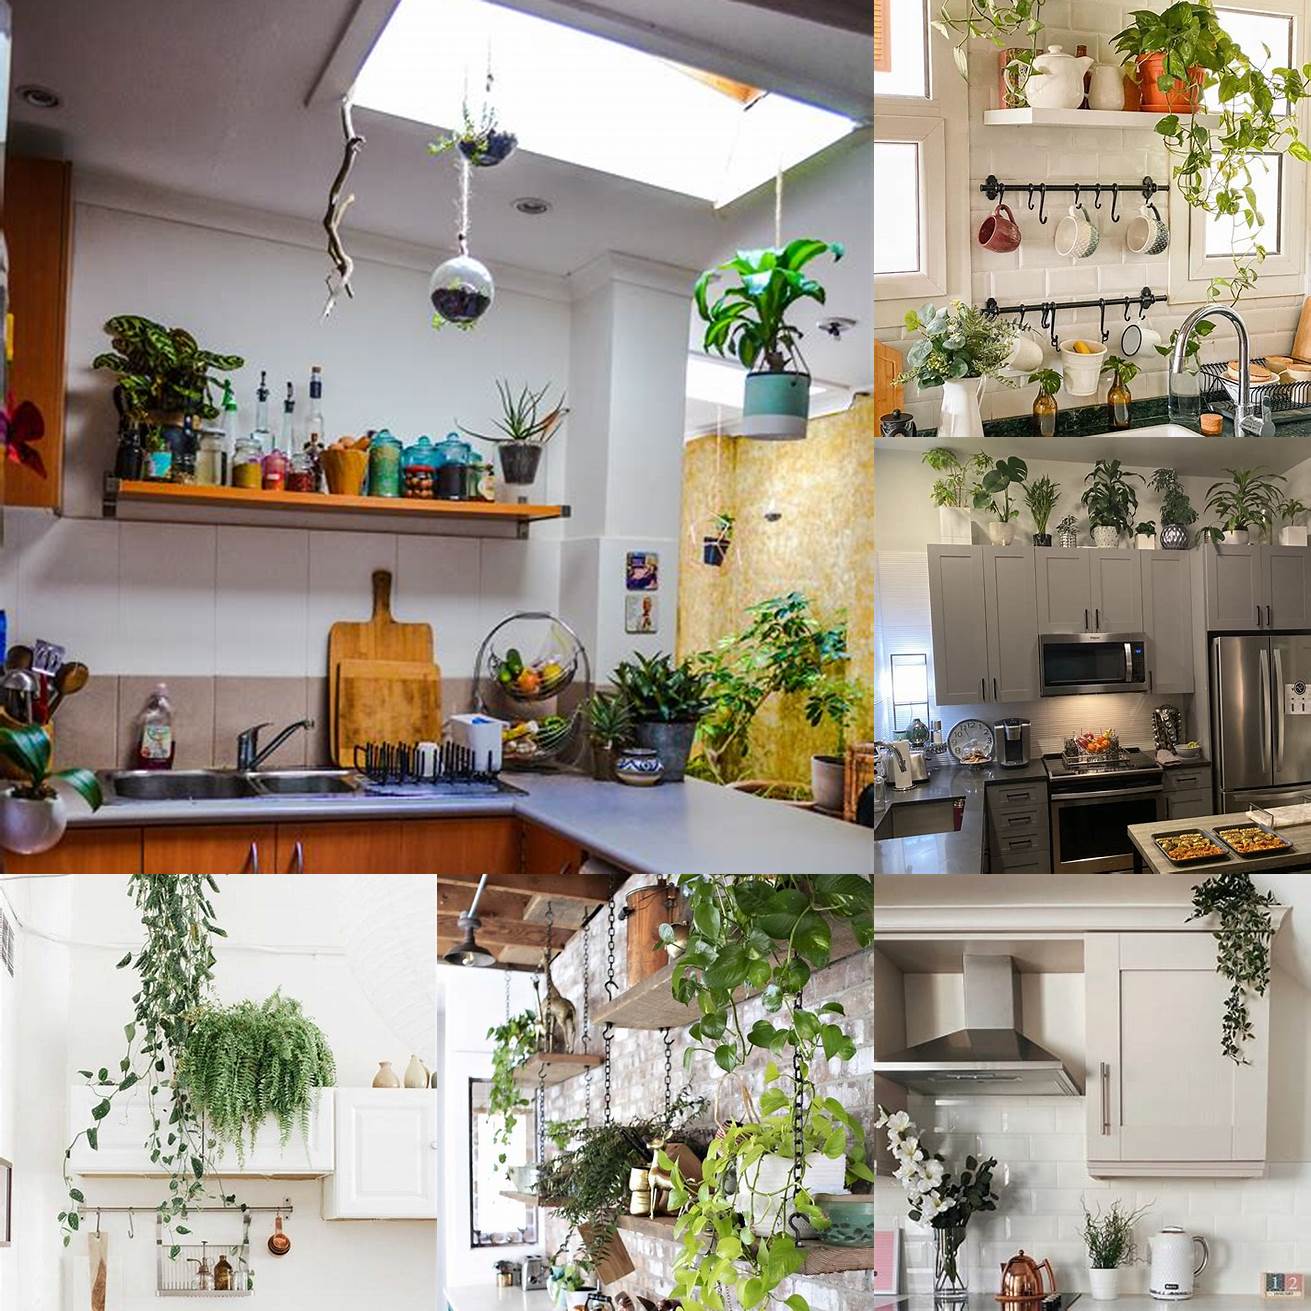 2 Add some greenery to your kitchen by placing plants on top of your cabinets